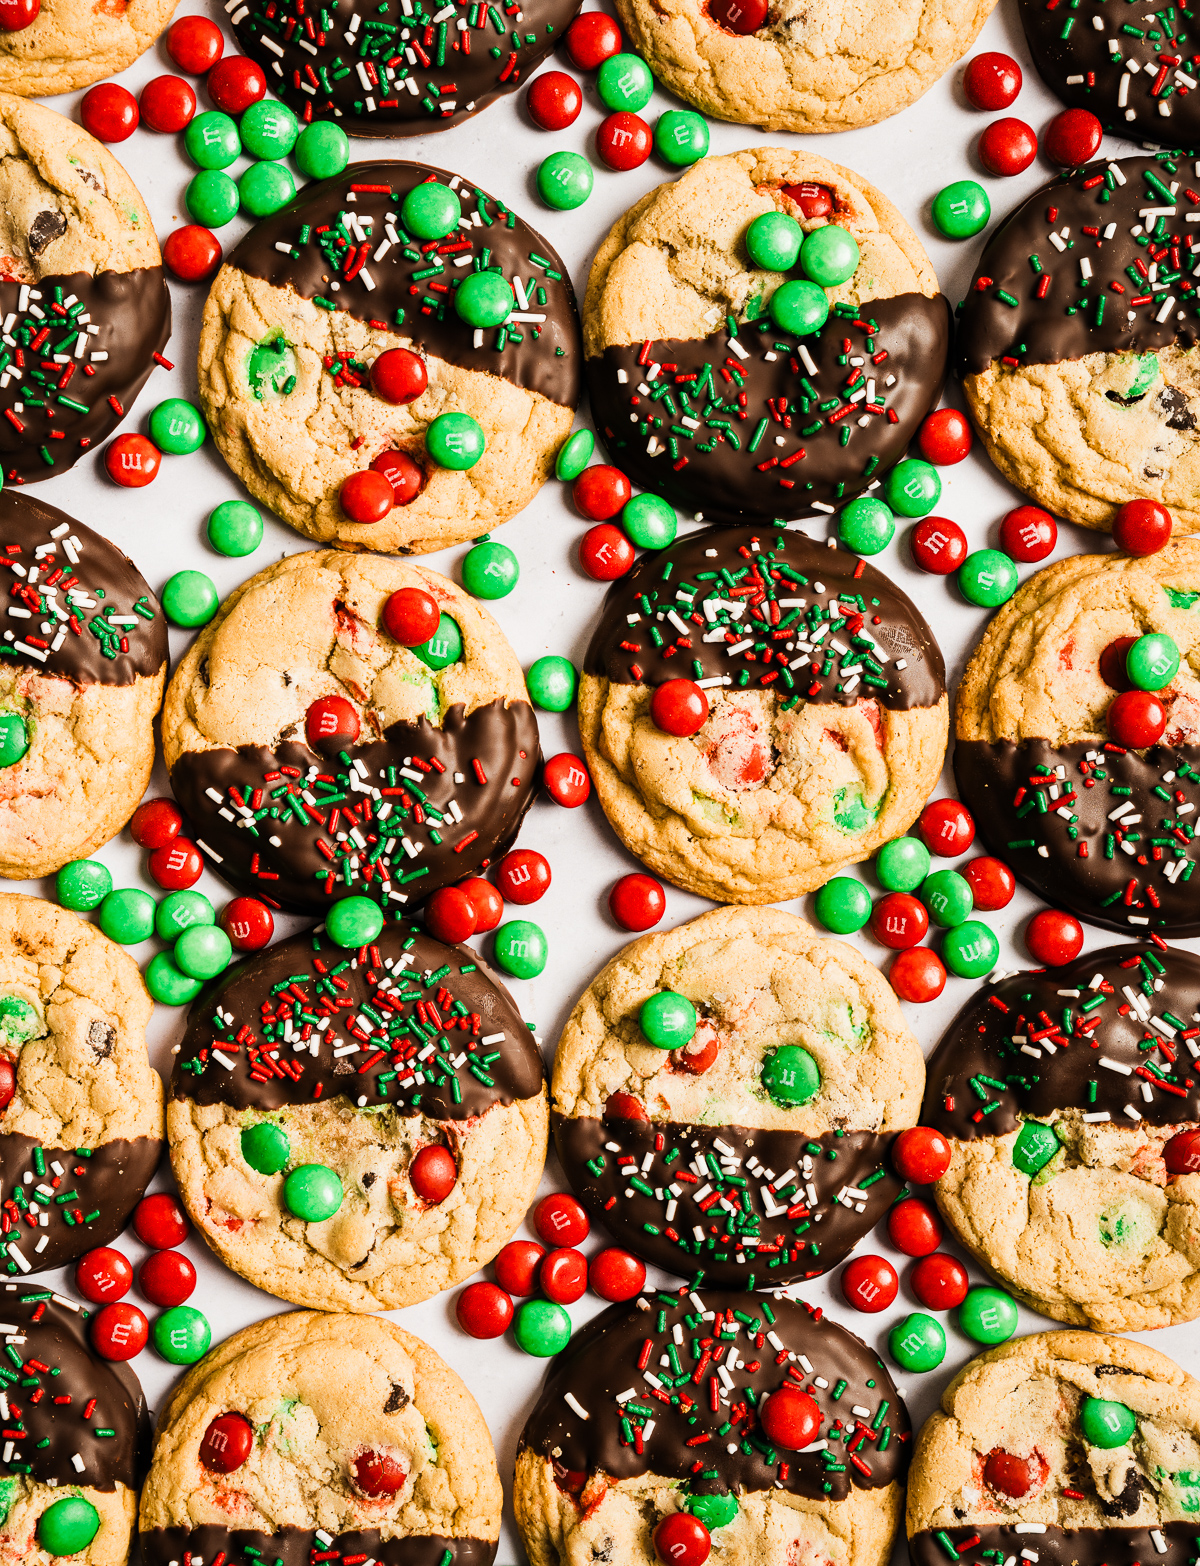 red and green M&M chewy chocolate chip cookies half dipped in chocolate decorated with red white and green sprinkles